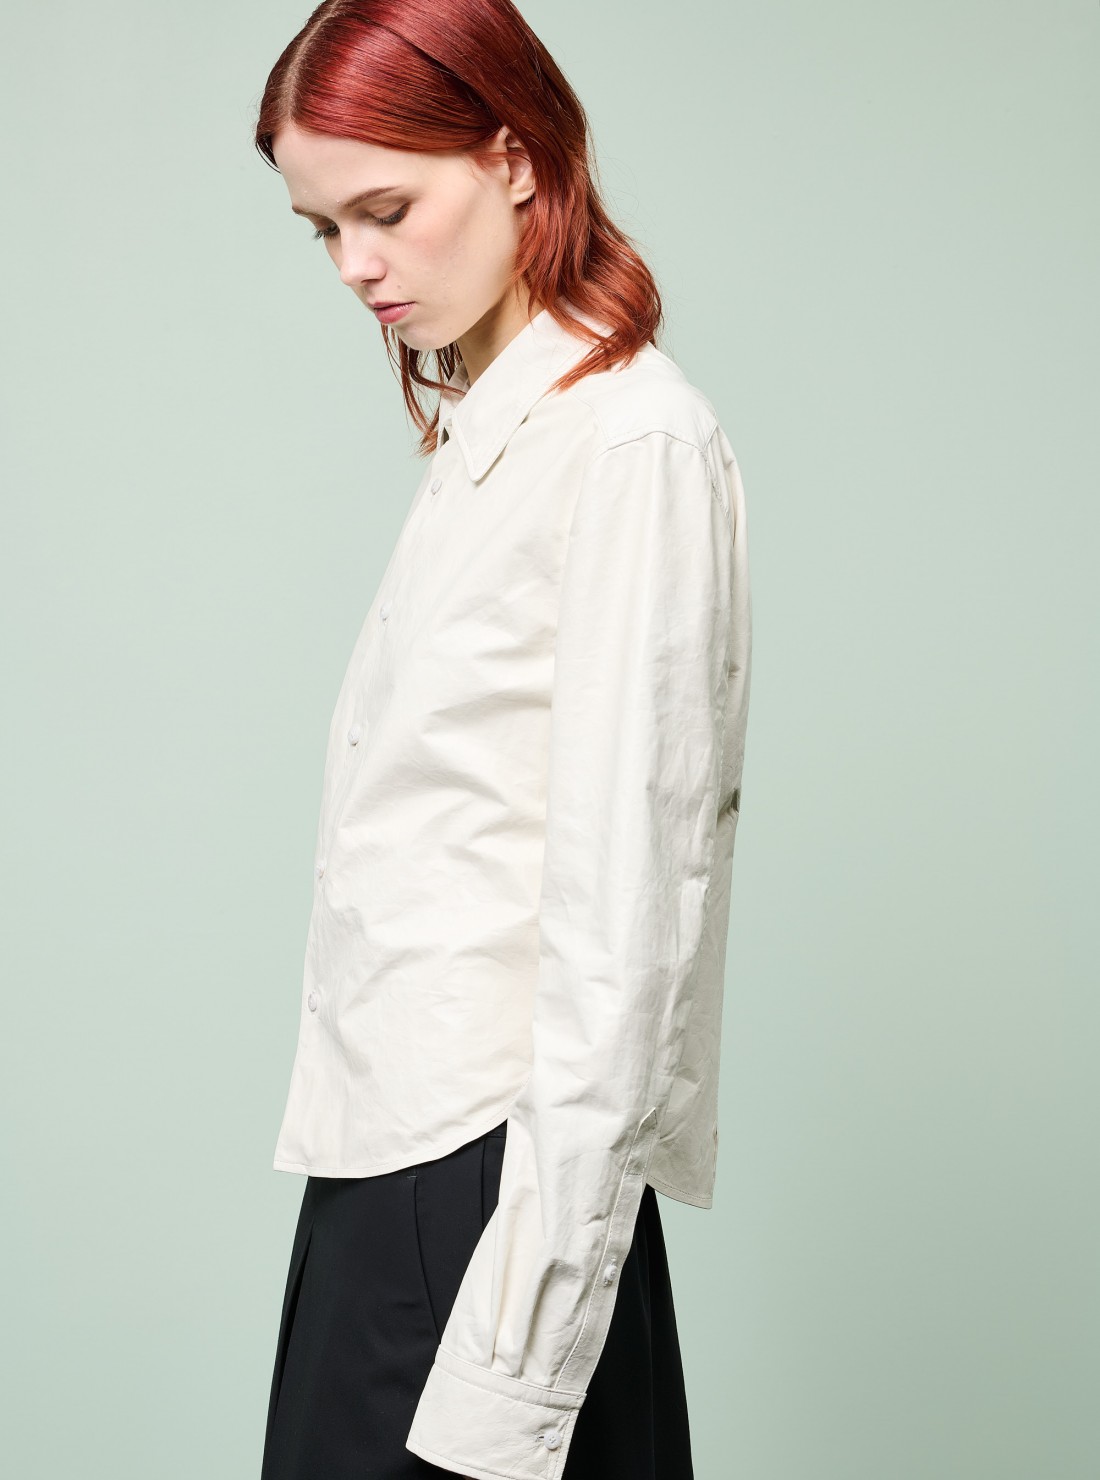 Alberik Rounded Cropped Shirt